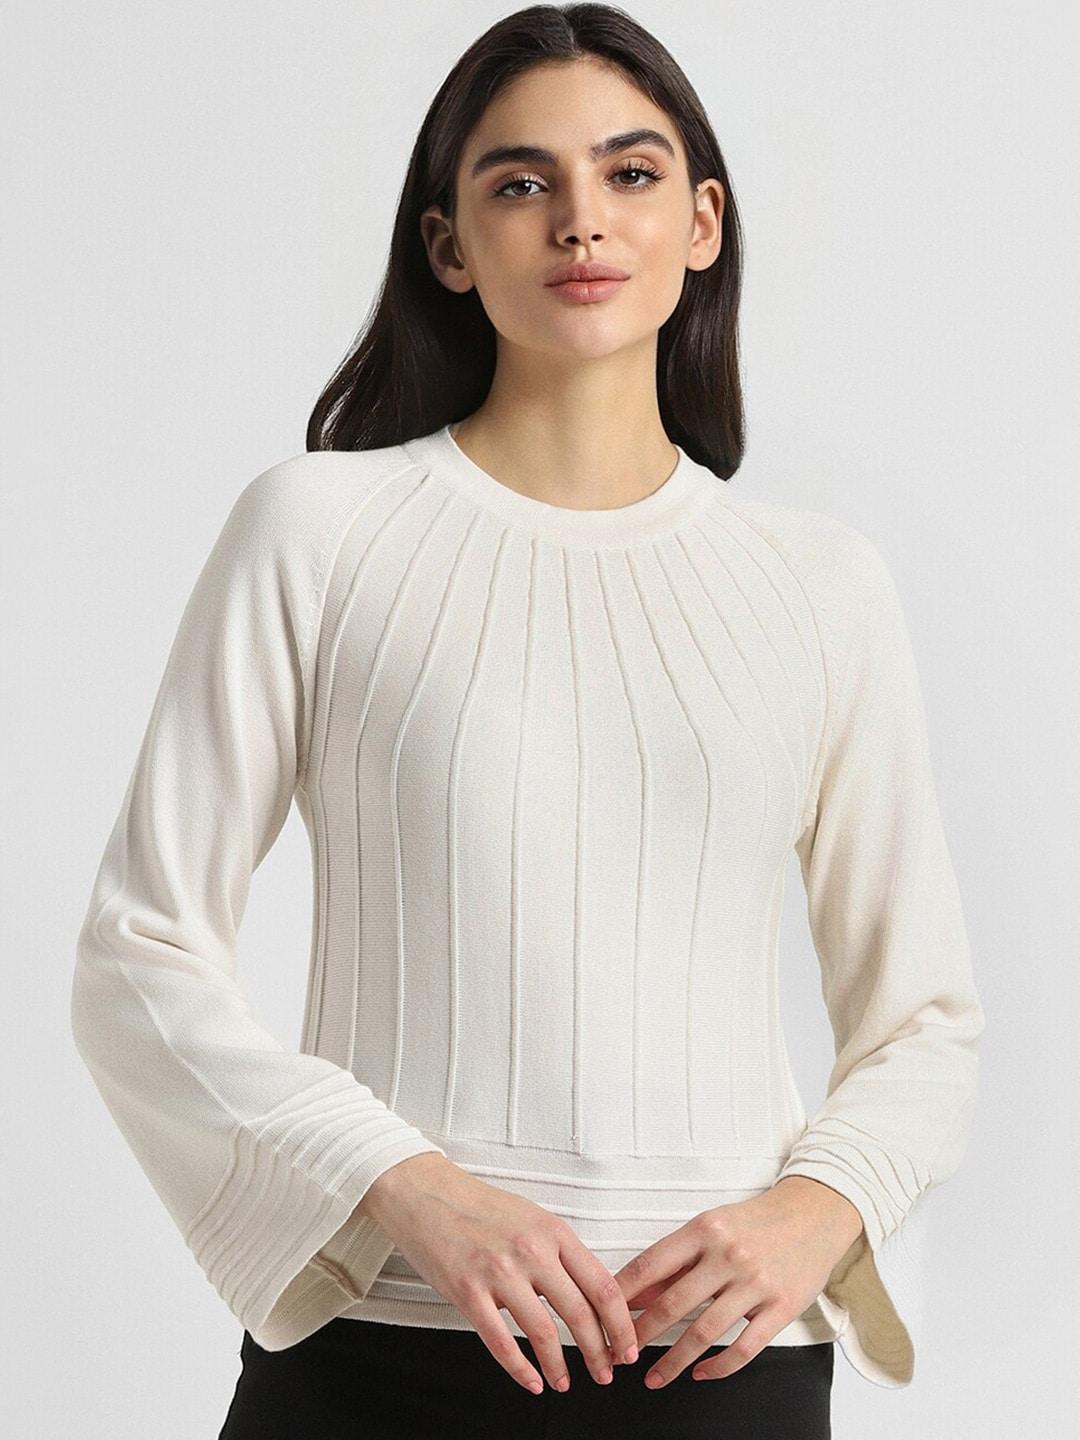 Allen Solly Woman Long Sleeves Casual Top